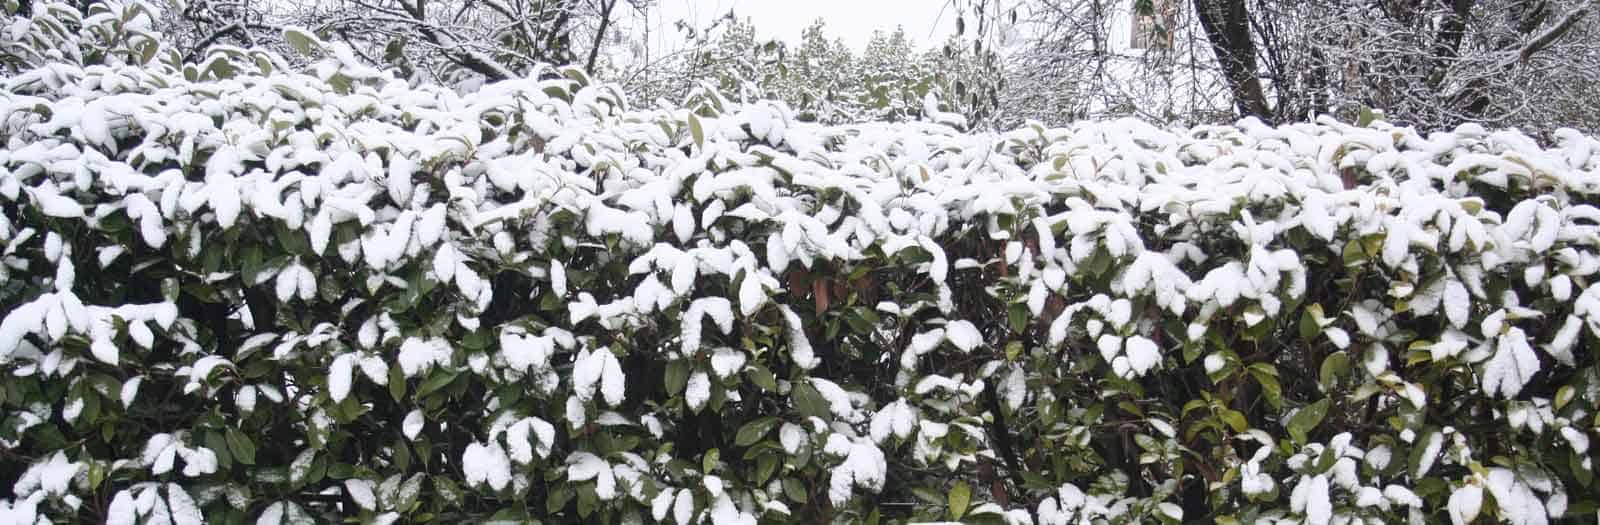 Shrubs Covered in Snow